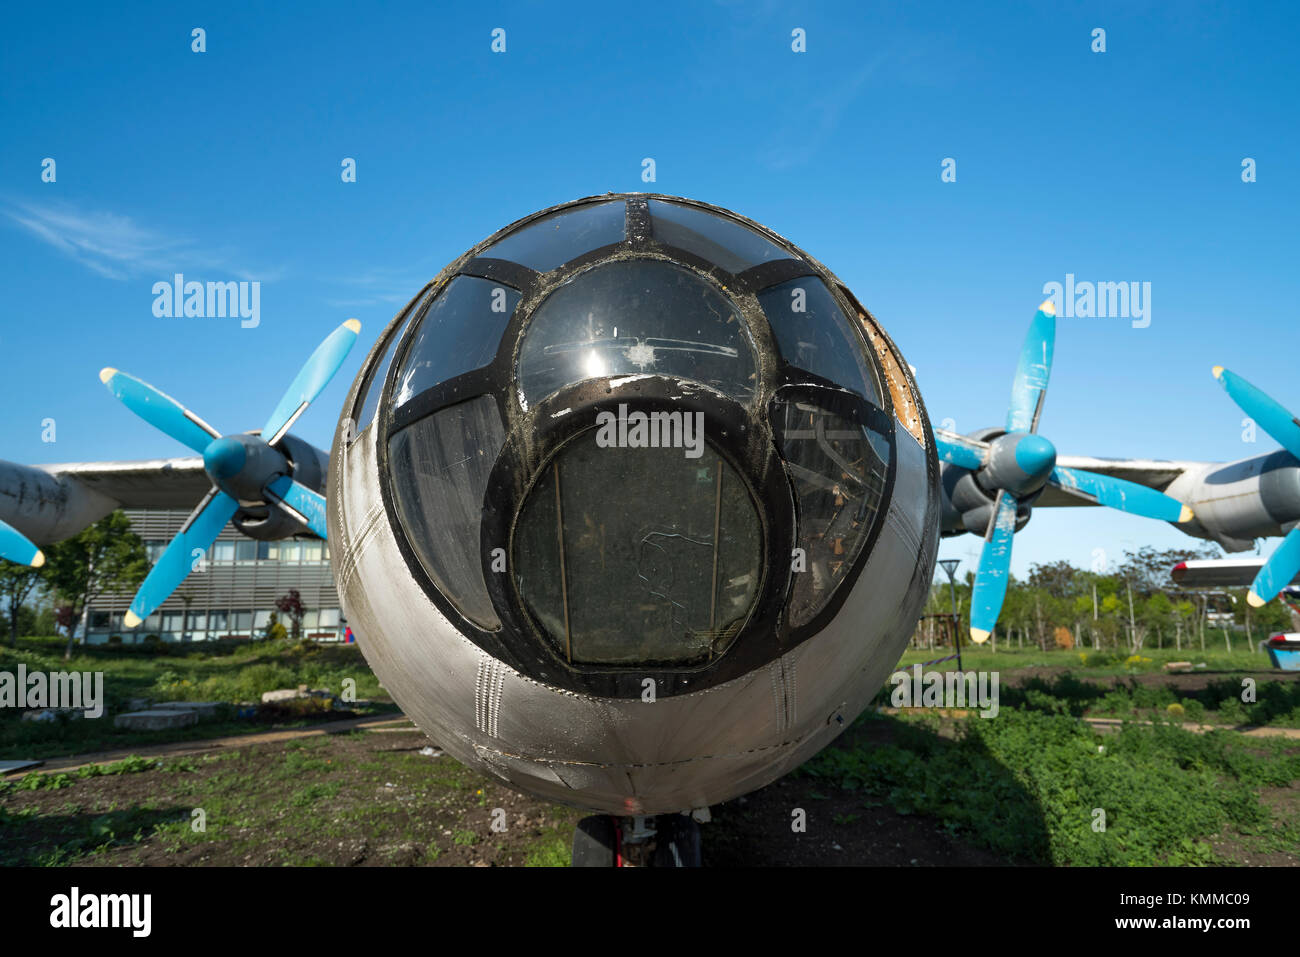 old rusty abandoned airplanes, front close-up view Stock Photo